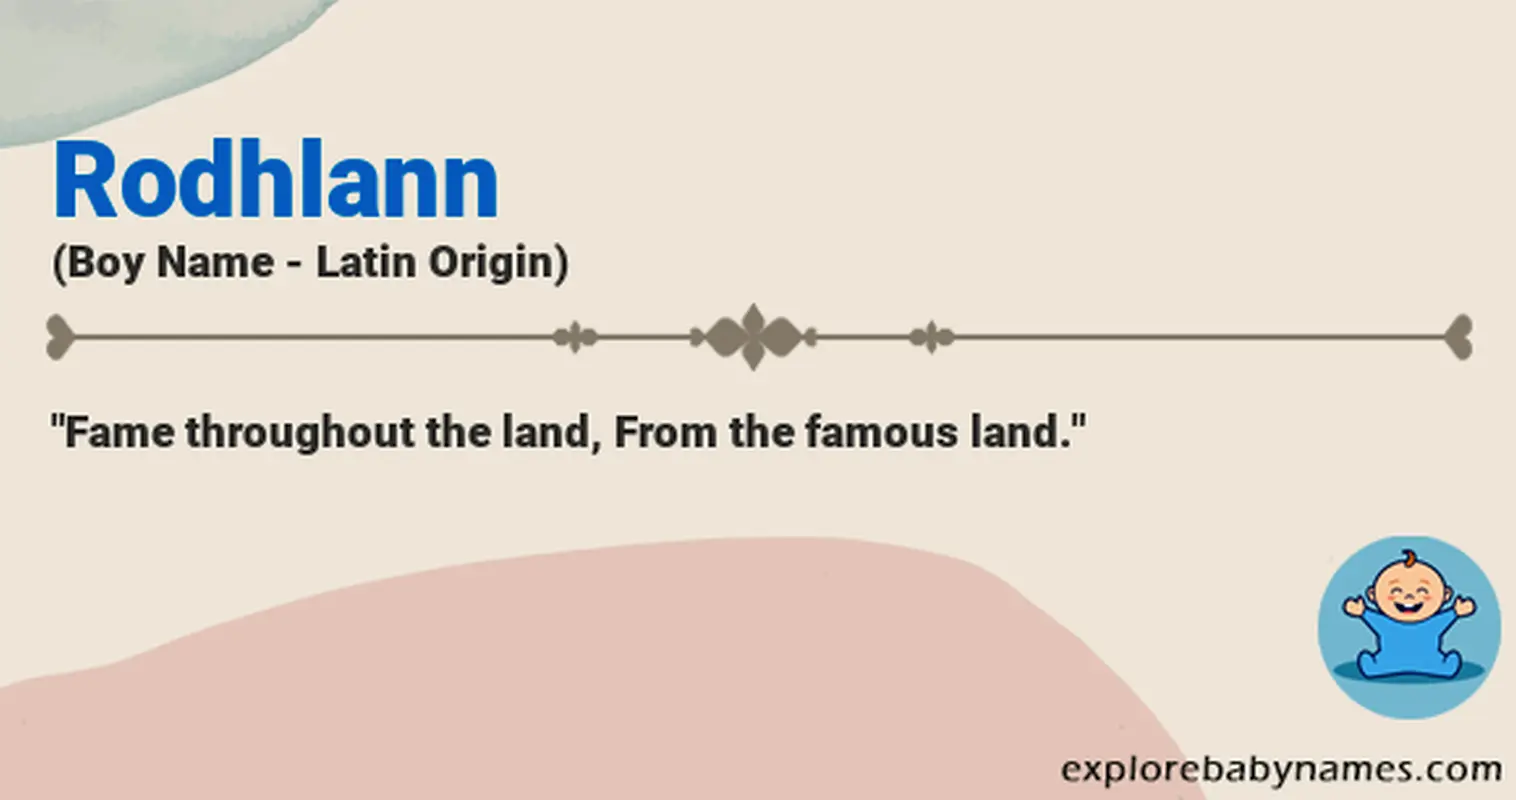 Meaning of Rodhlann